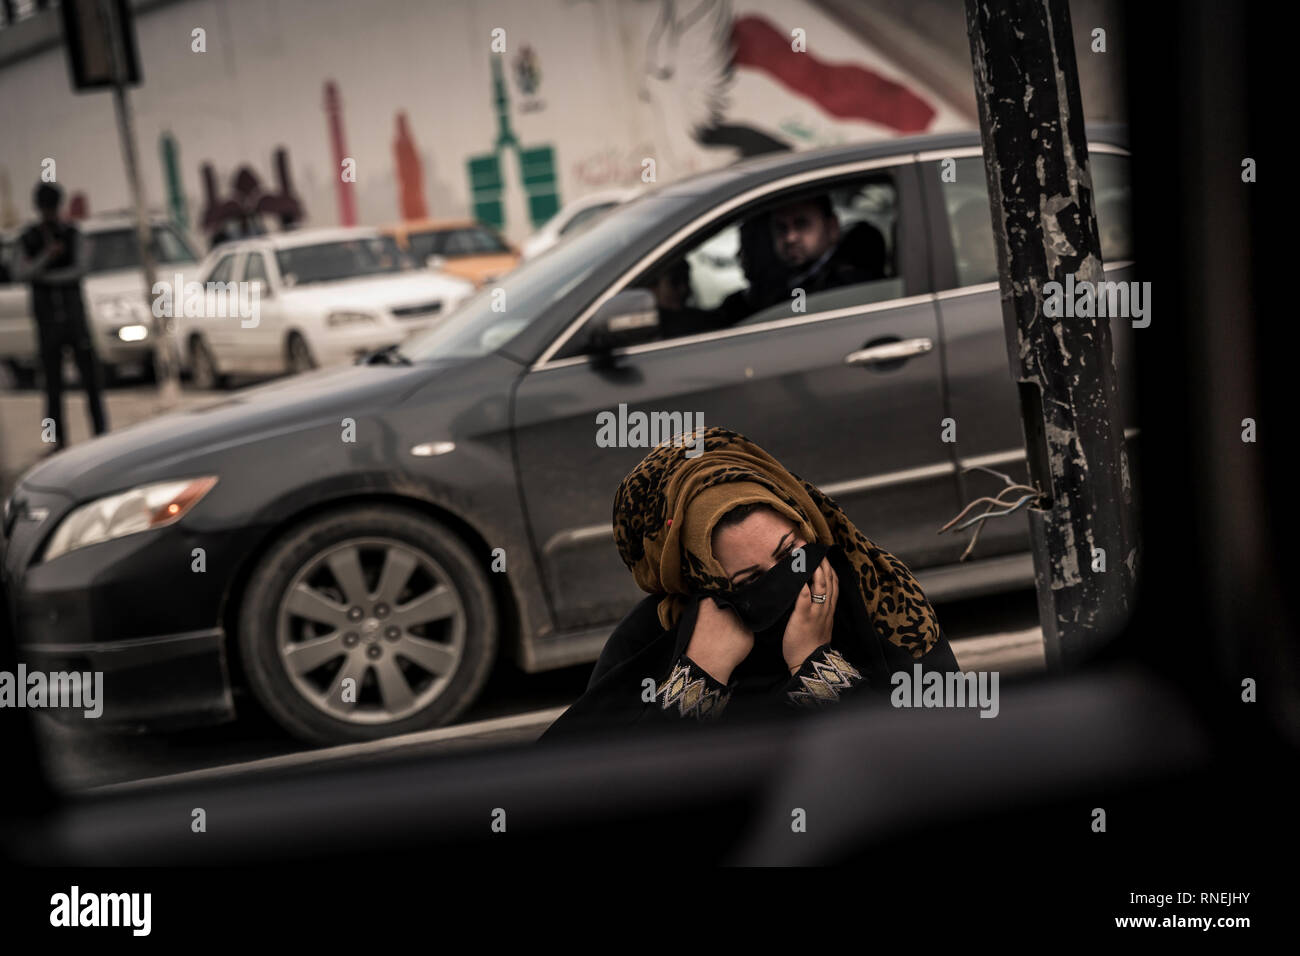 Veiled beggar on a street in the center of Mossul. After the liberation from the IS, normality slowly returns to the maltreated city, but there is a lot of poverty. Stock Photo